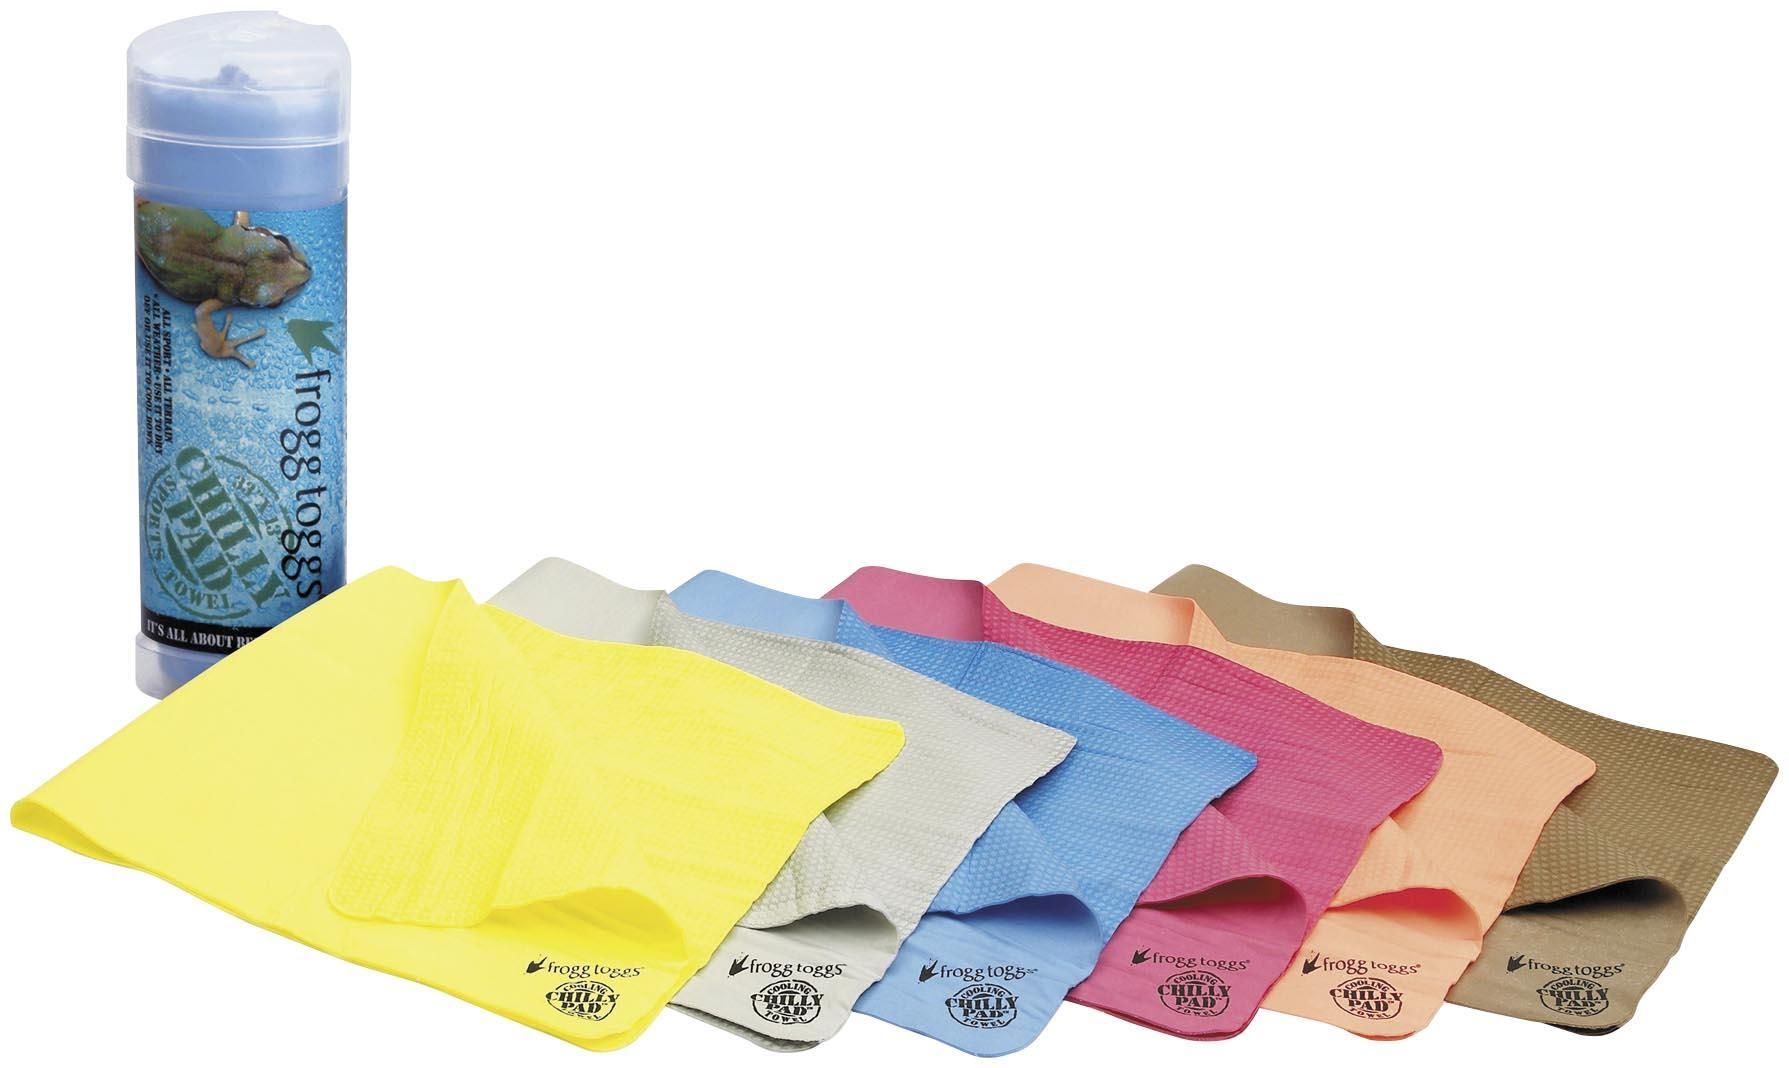 2L2J-FROGG-TOGGS-CP100B Chilly Pad - 12pk Assortment